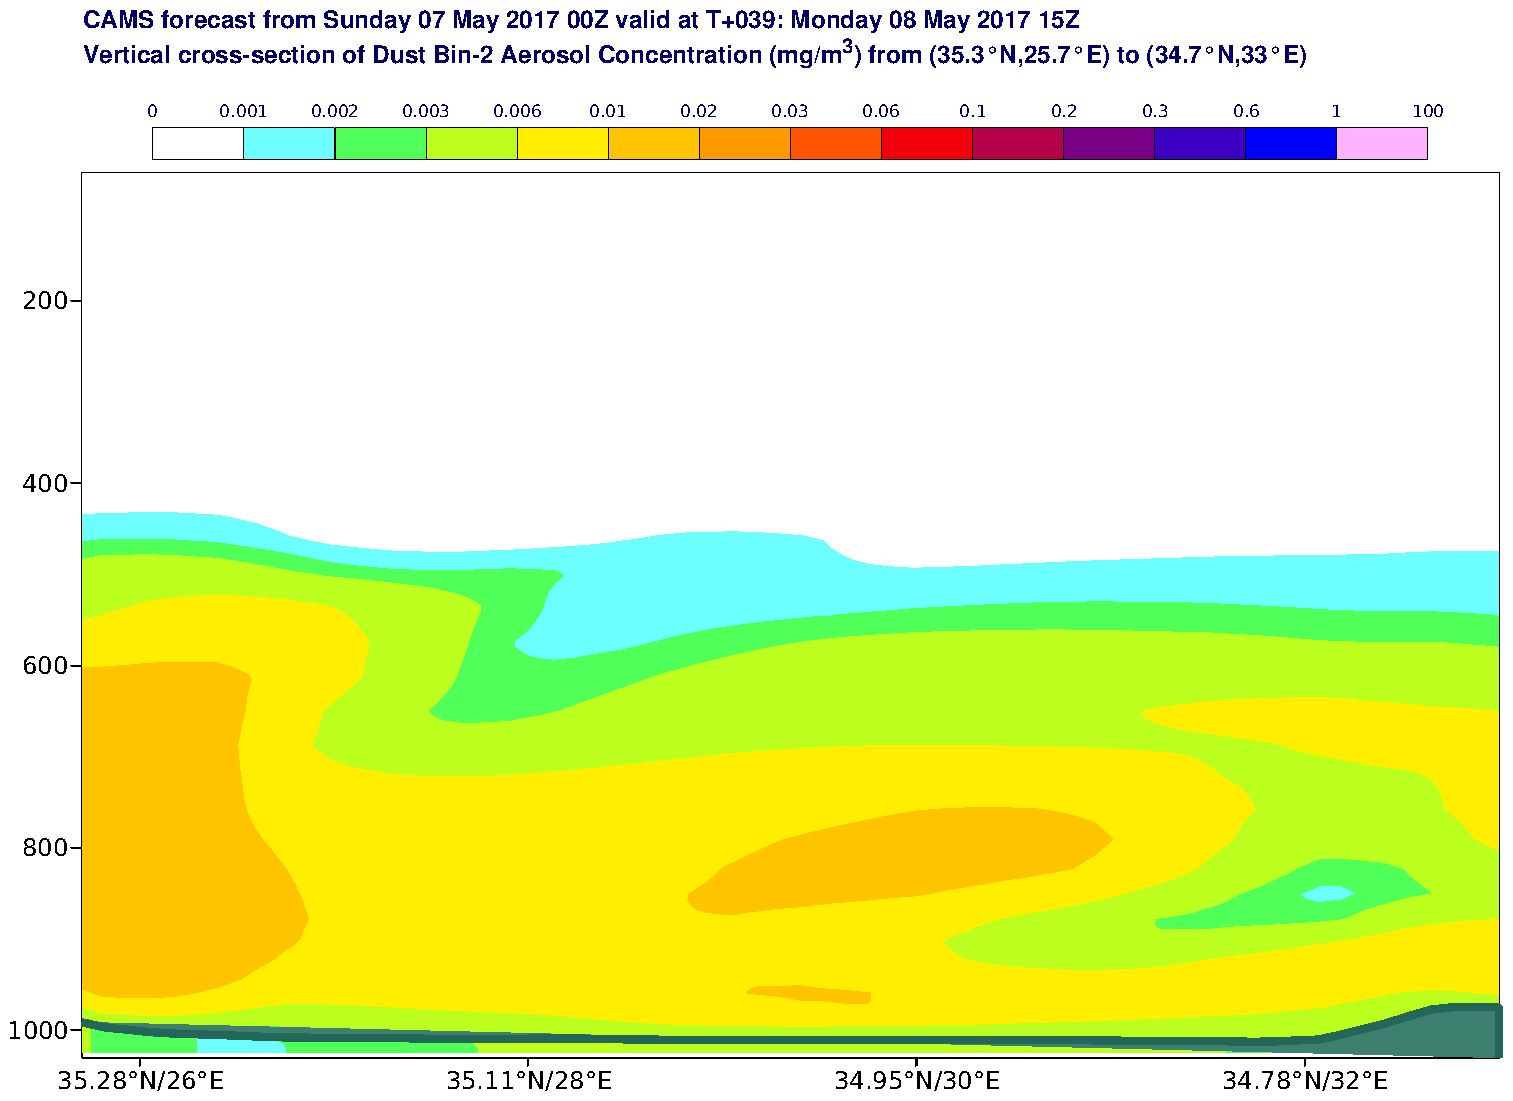 Vertical cross-section of Dust Bin-2 Aerosol Concentration (mg/m3) valid at T39 - 2017-05-08 15:00